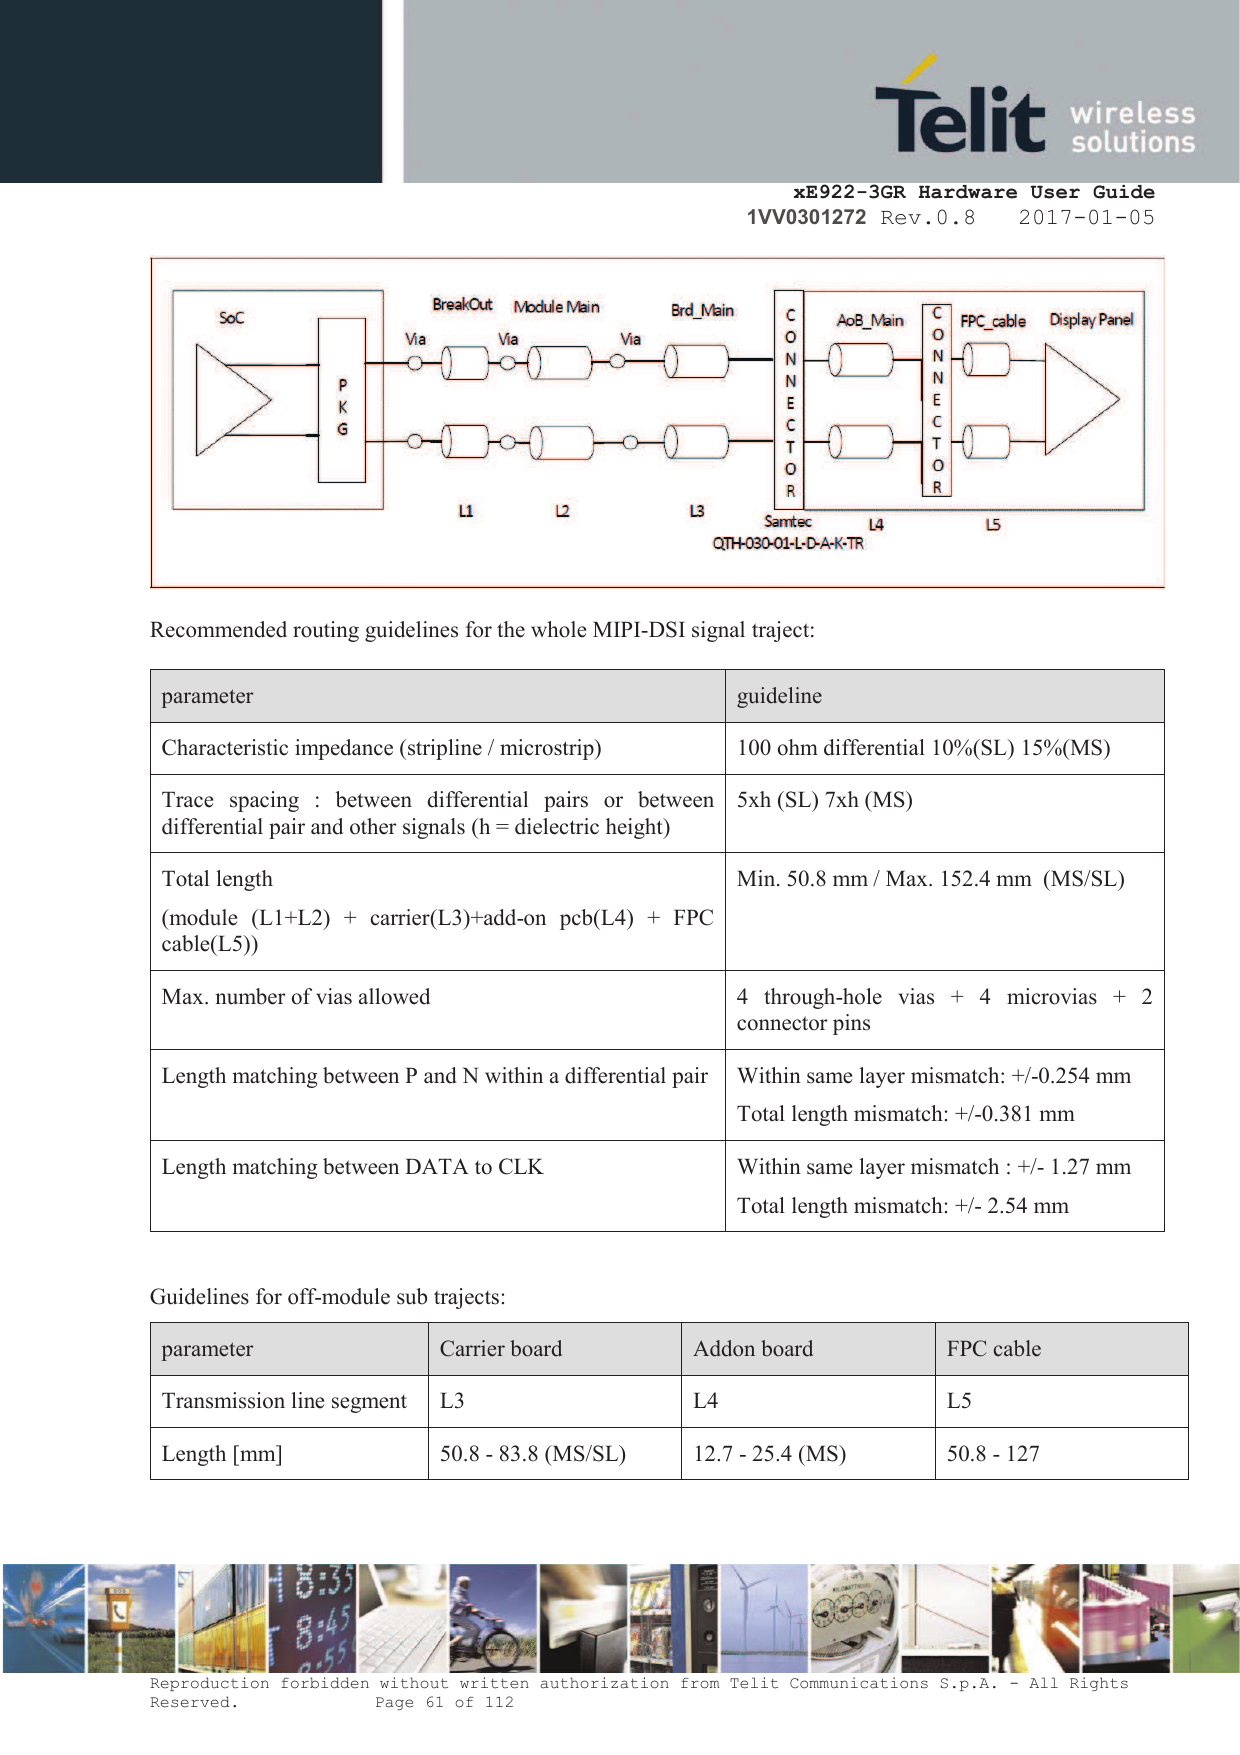     xE922-3GR Hardware User Guide 1VV0301272 Rev.0.8   2017-01-05 Reproduction forbidden without written authorization from Telit Communications S.p.A. - All Rights Reserved.    Page 61 of 112    Recommended routing guidelines for the whole MIPI-DSI signal traject:  parameter  guideline Characteristic impedance (stripline / microstrip) 100 ohm differential 10%(SL) 15%(MS) Trace  spacing  :  between  differential  pairs  or  between differential pair and other signals (h = dielectric height) 5xh (SL) 7xh (MS) Total length  (module  (L1+L2)  +  carrier(L3)+add-on  pcb(L4) +  FPC cable(L5)) Min. 50.8 mm / Max. 152.4 mm  (MS/SL) Max. number of vias allowed 4  through-hole  vias  +  4  microvias  +  2 connector pins Length matching between P and N within a differential pair Within same layer mismatch: +/-0.254 mm Total length mismatch: +/-0.381 mm Length matching between DATA to CLK Within same layer mismatch : +/- 1.27 mm Total length mismatch: +/- 2.54 mm  Guidelines for off-module sub trajects: parameter Carrier board Addon board FPC cable Transmission line segment  L3 L4 L5 Length [mm] 50.8 - 83.8 (MS/SL) 12.7 - 25.4 (MS) 50.8 - 127   